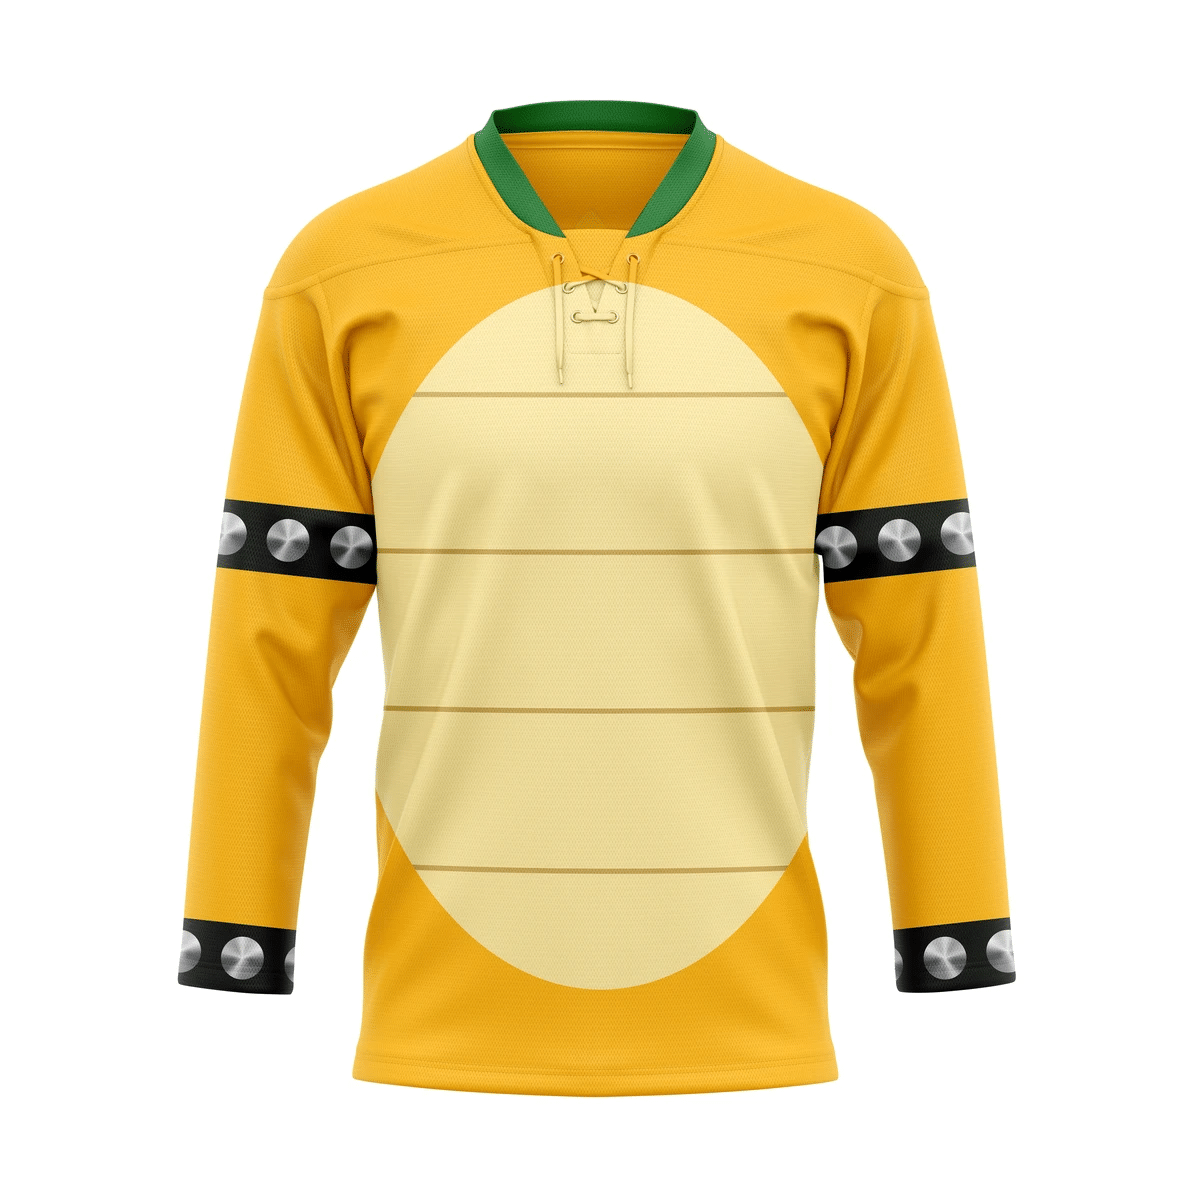 The style of a hockey jersey should match your personality. 13